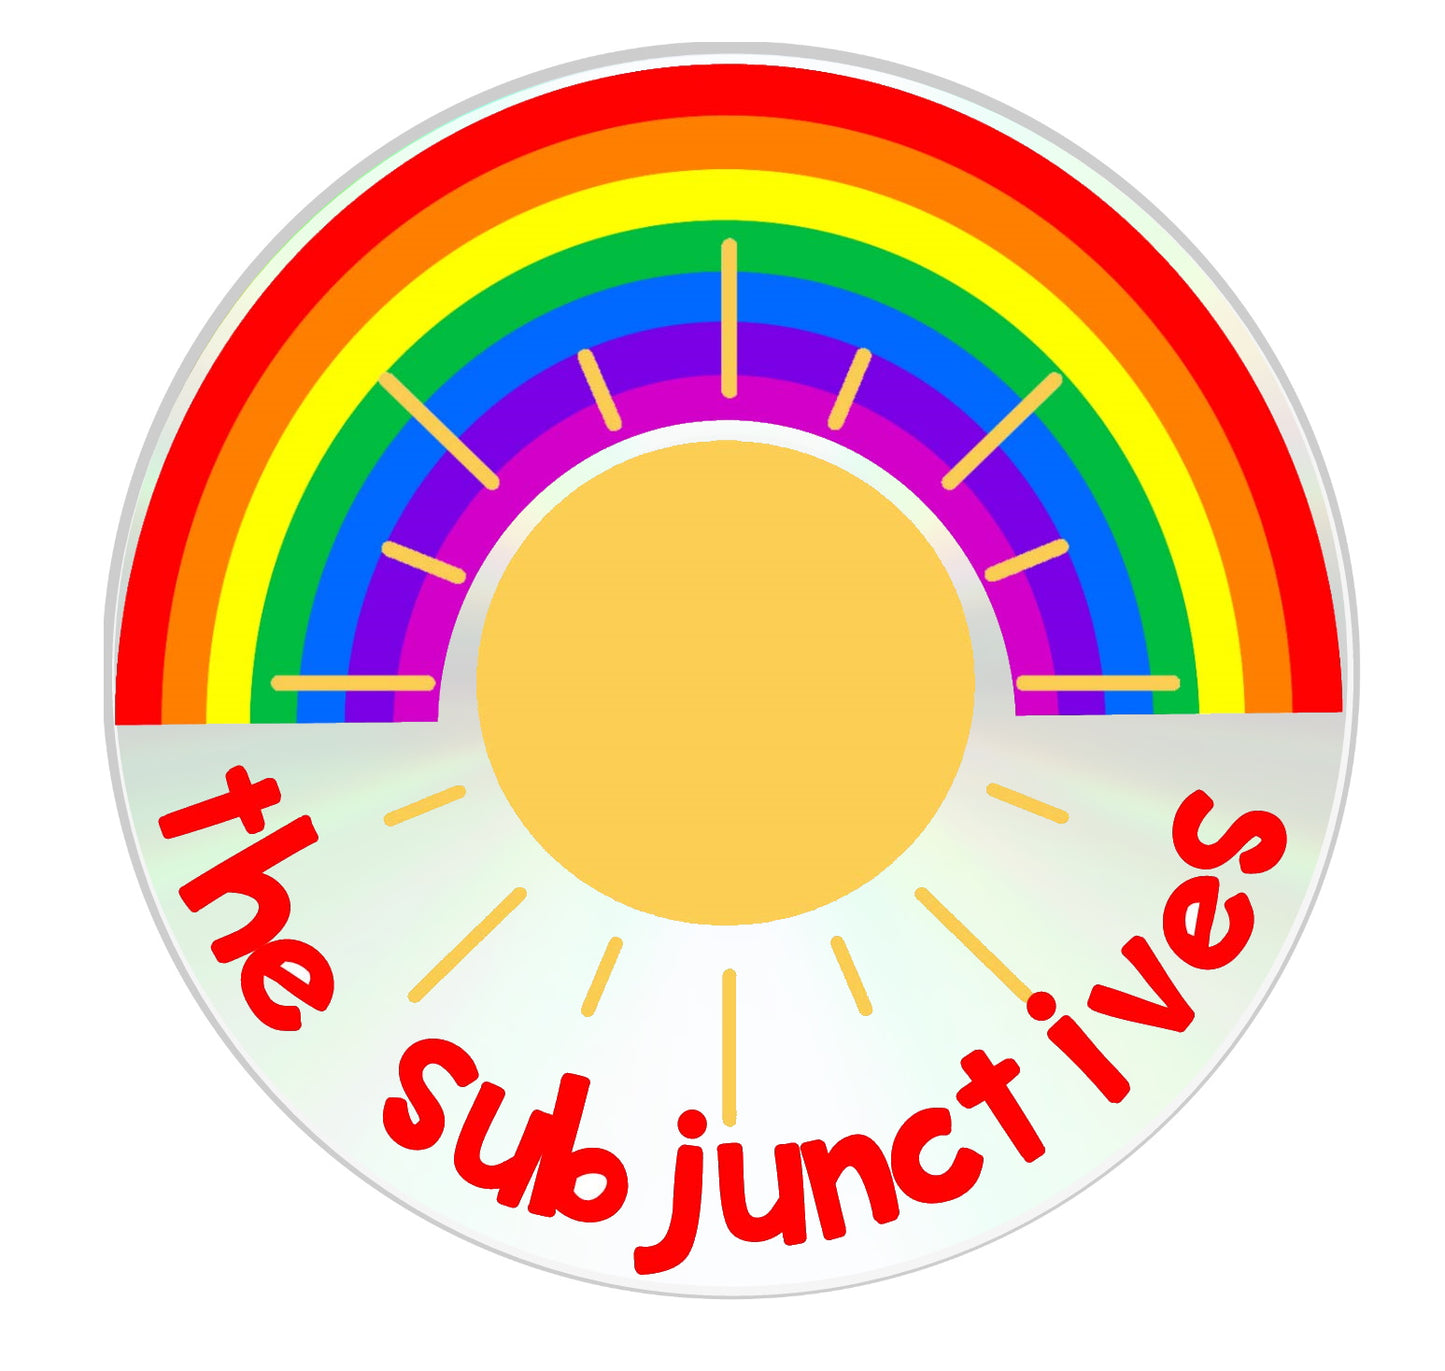 The Subjunctives - Sunshine and Rainbows